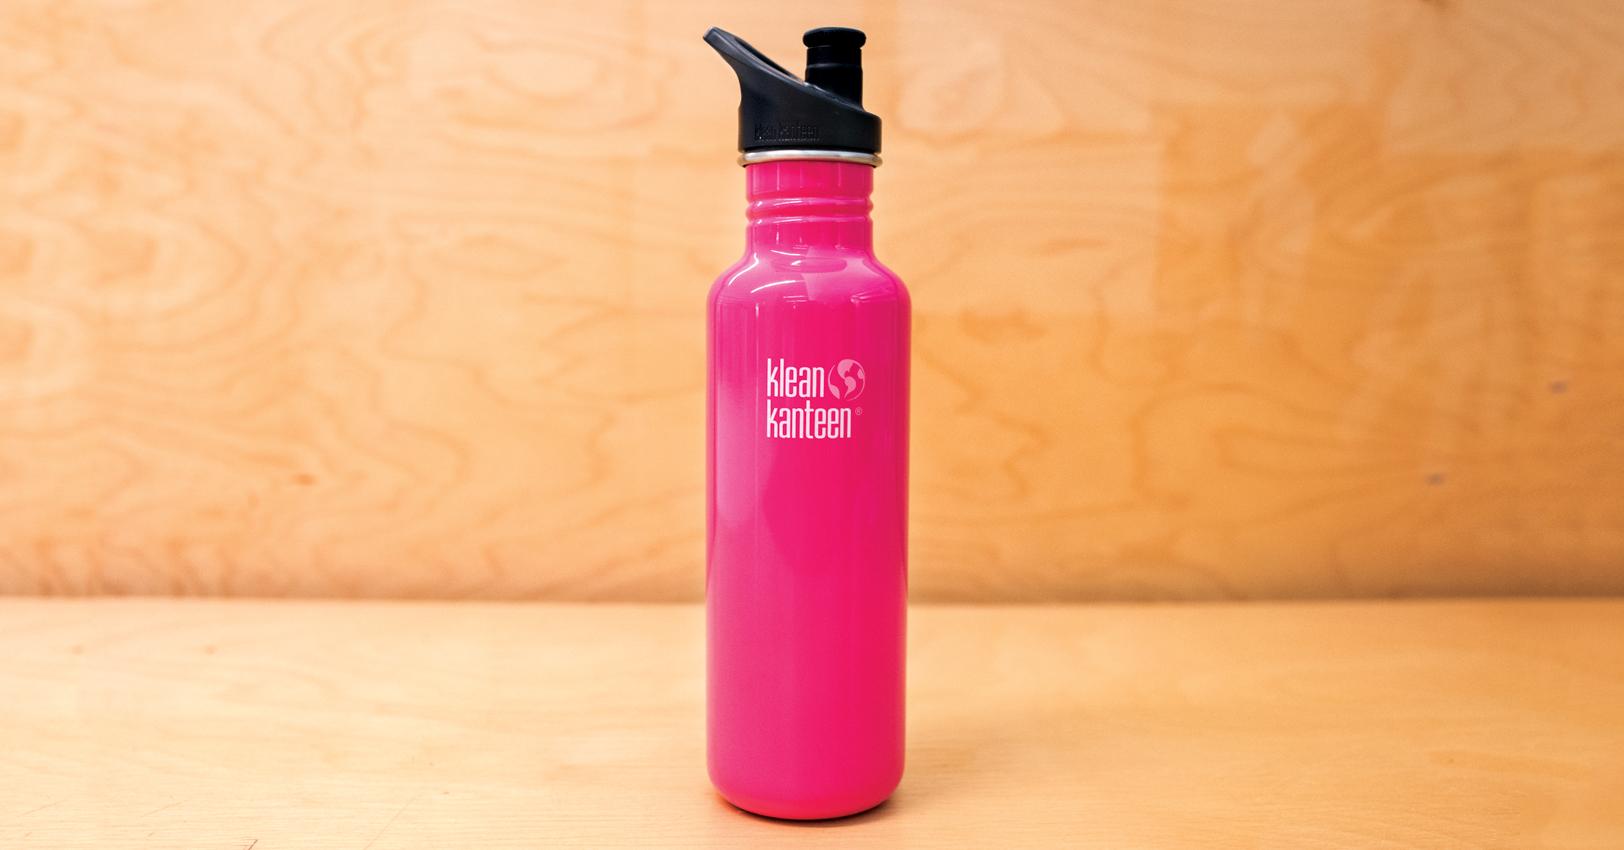 Manna Water Bottle Review: As Good as S'Well or Klean Kanteen?